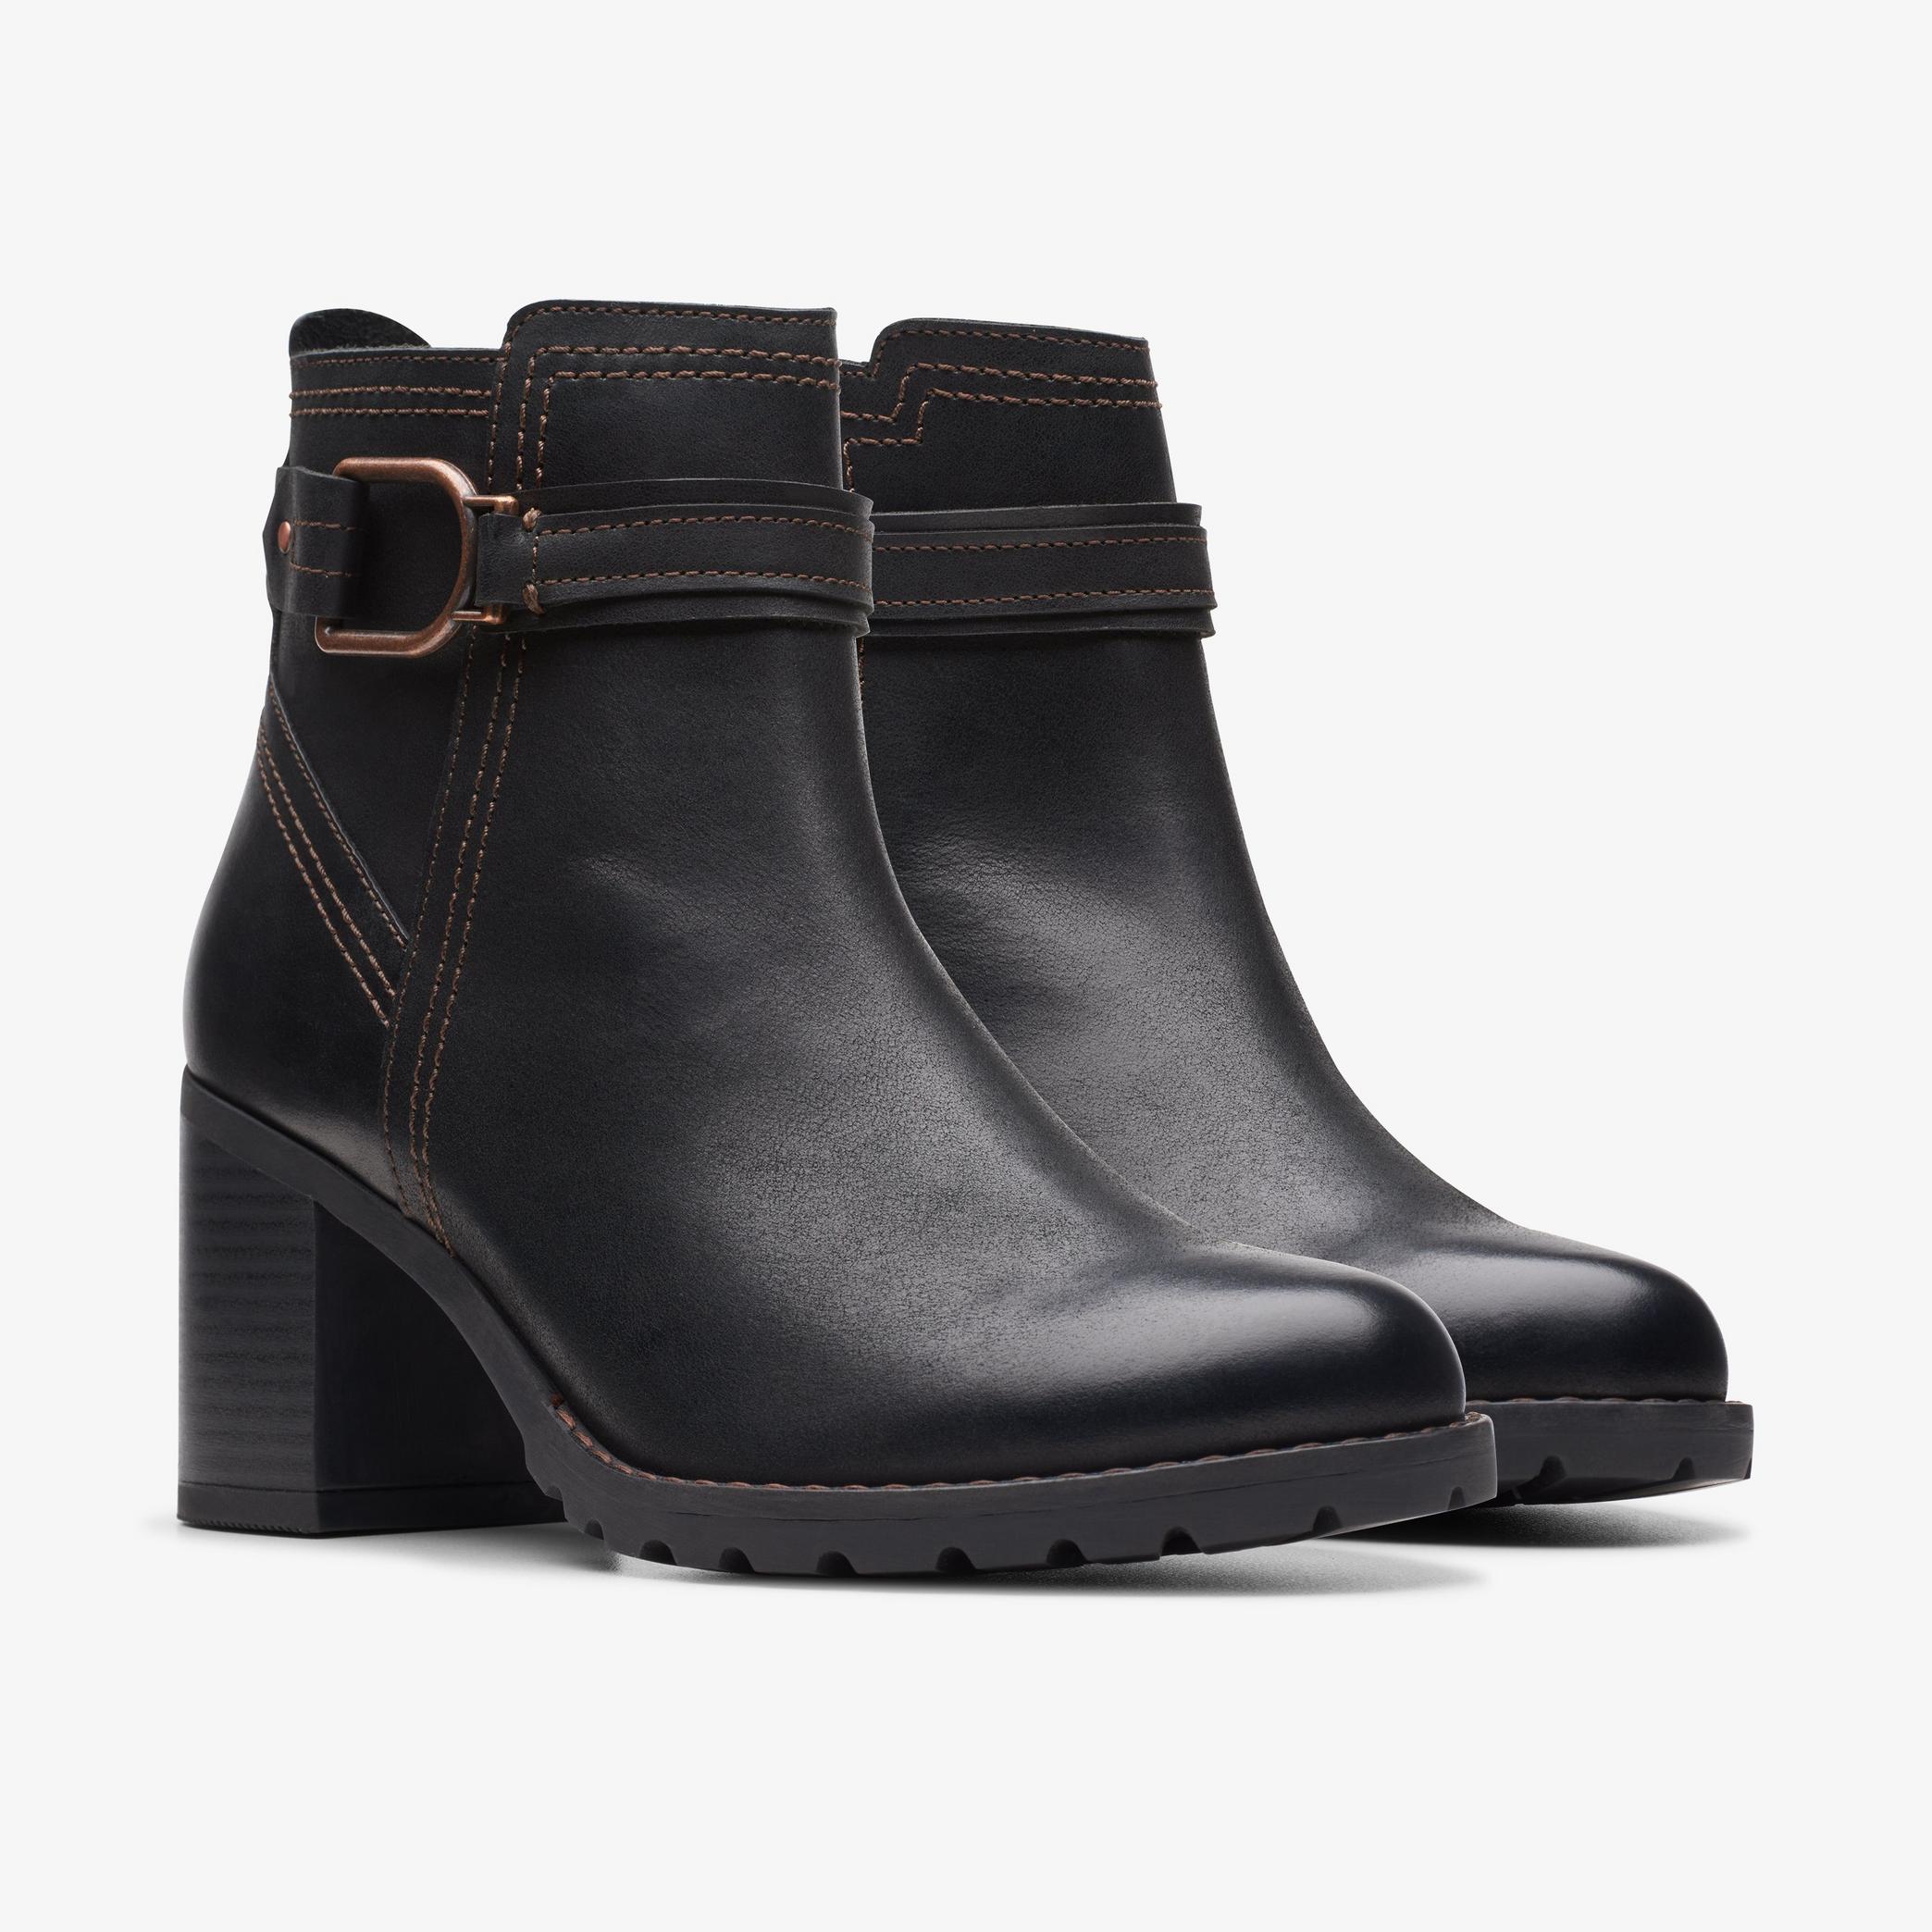 Leda Strap Black Leather Ankle Boots, view 5 of 7